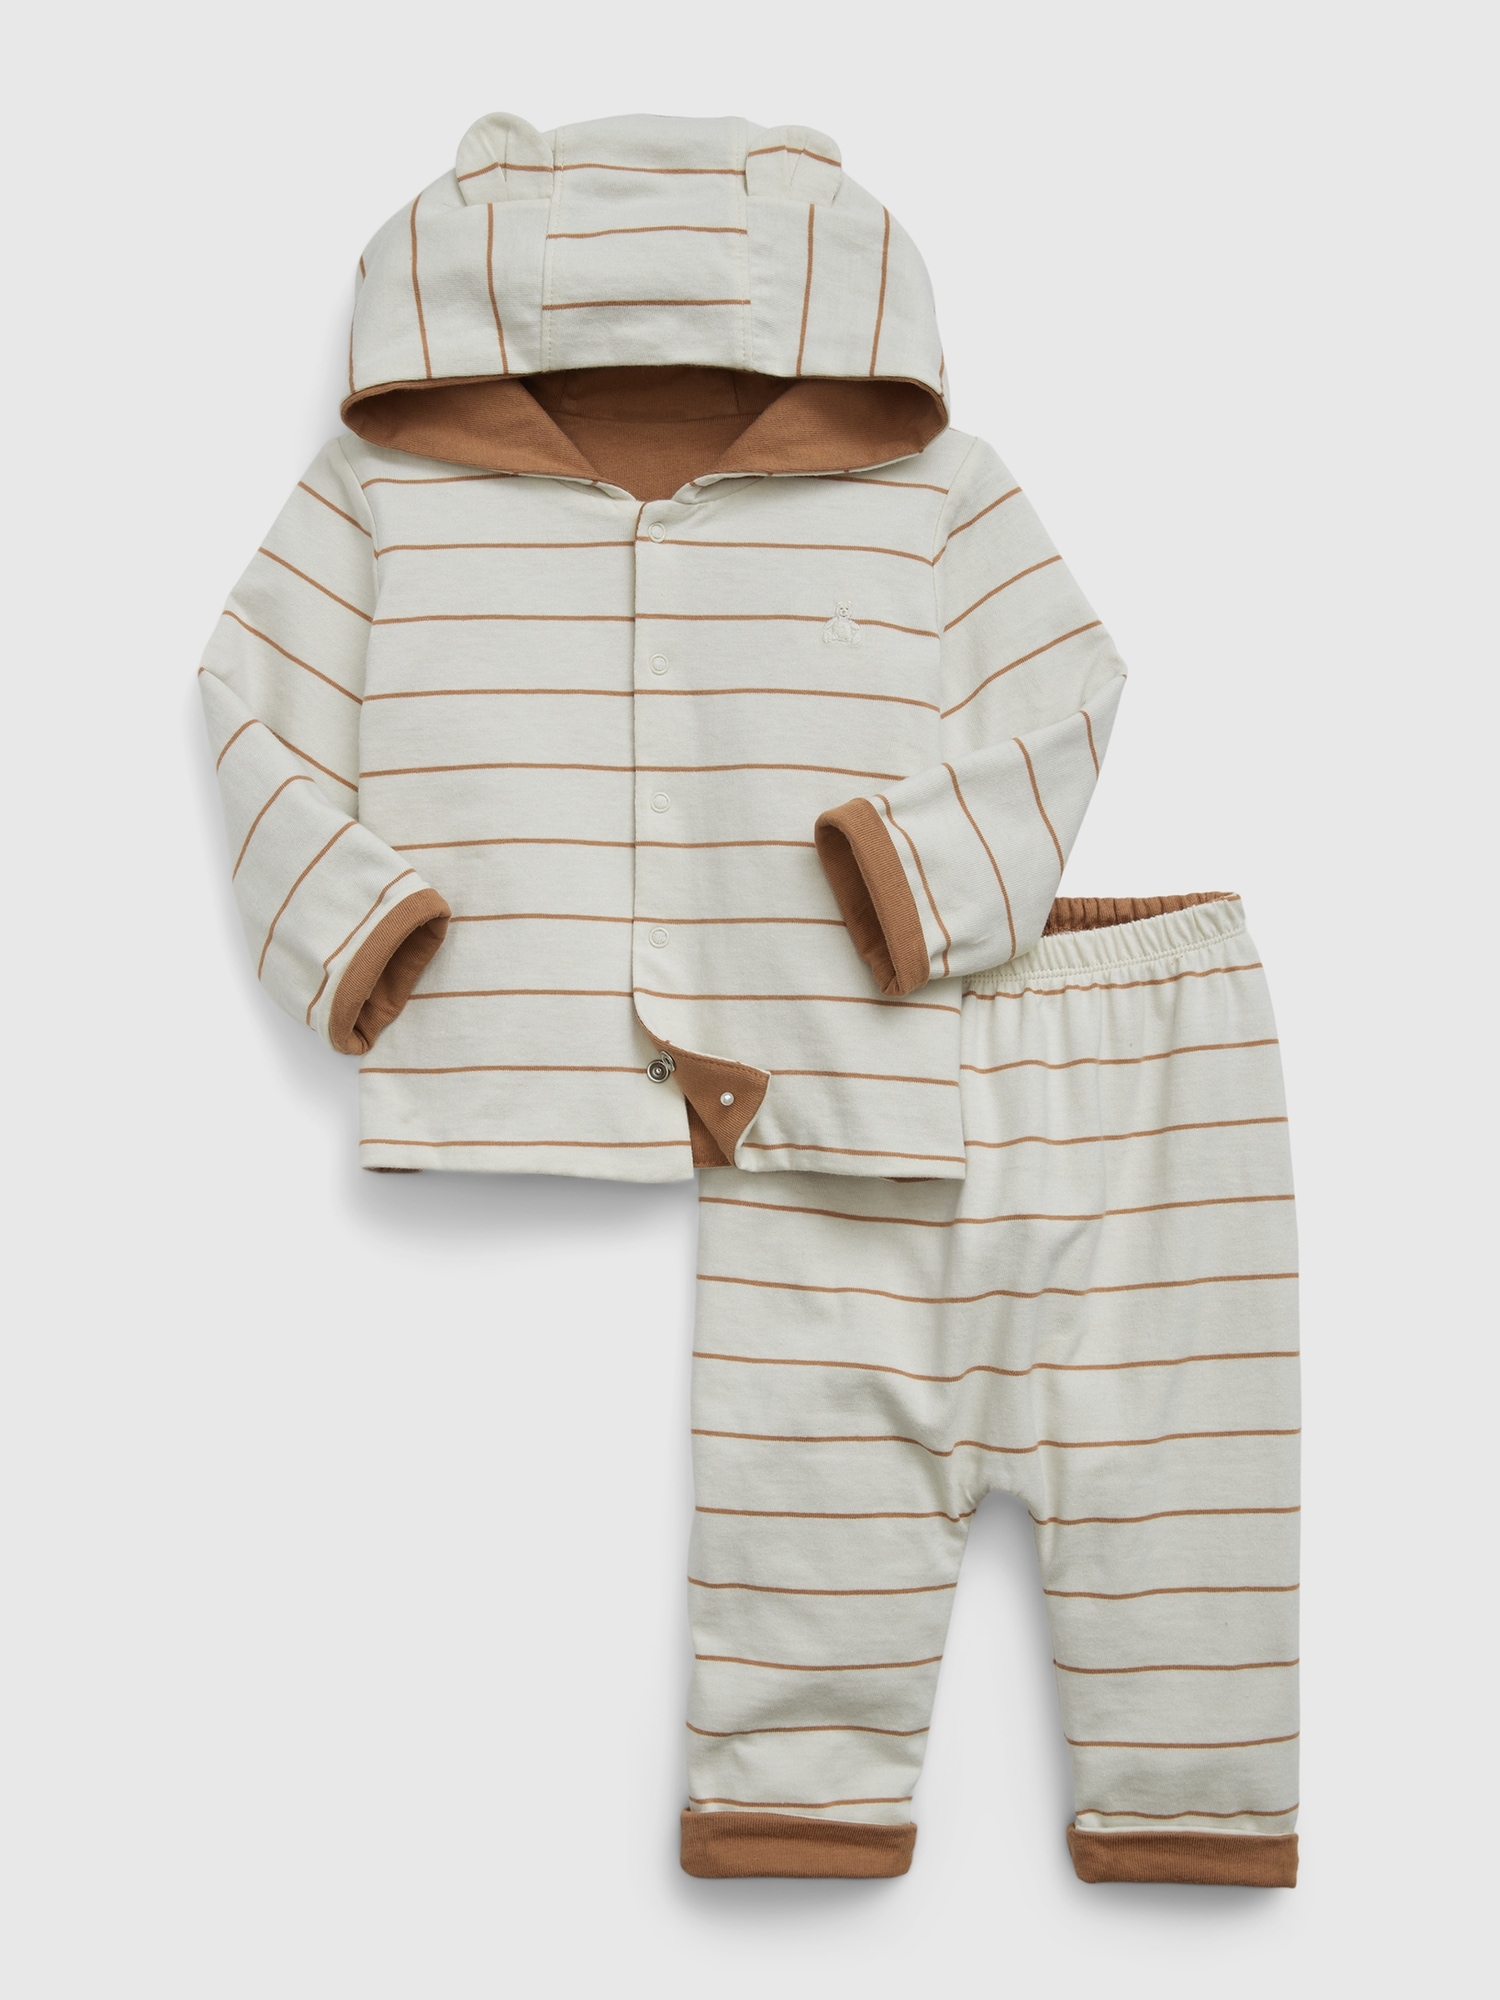 Gap Baby First Favorites Organic Cotton Reversible Two-Piece Outfit Set